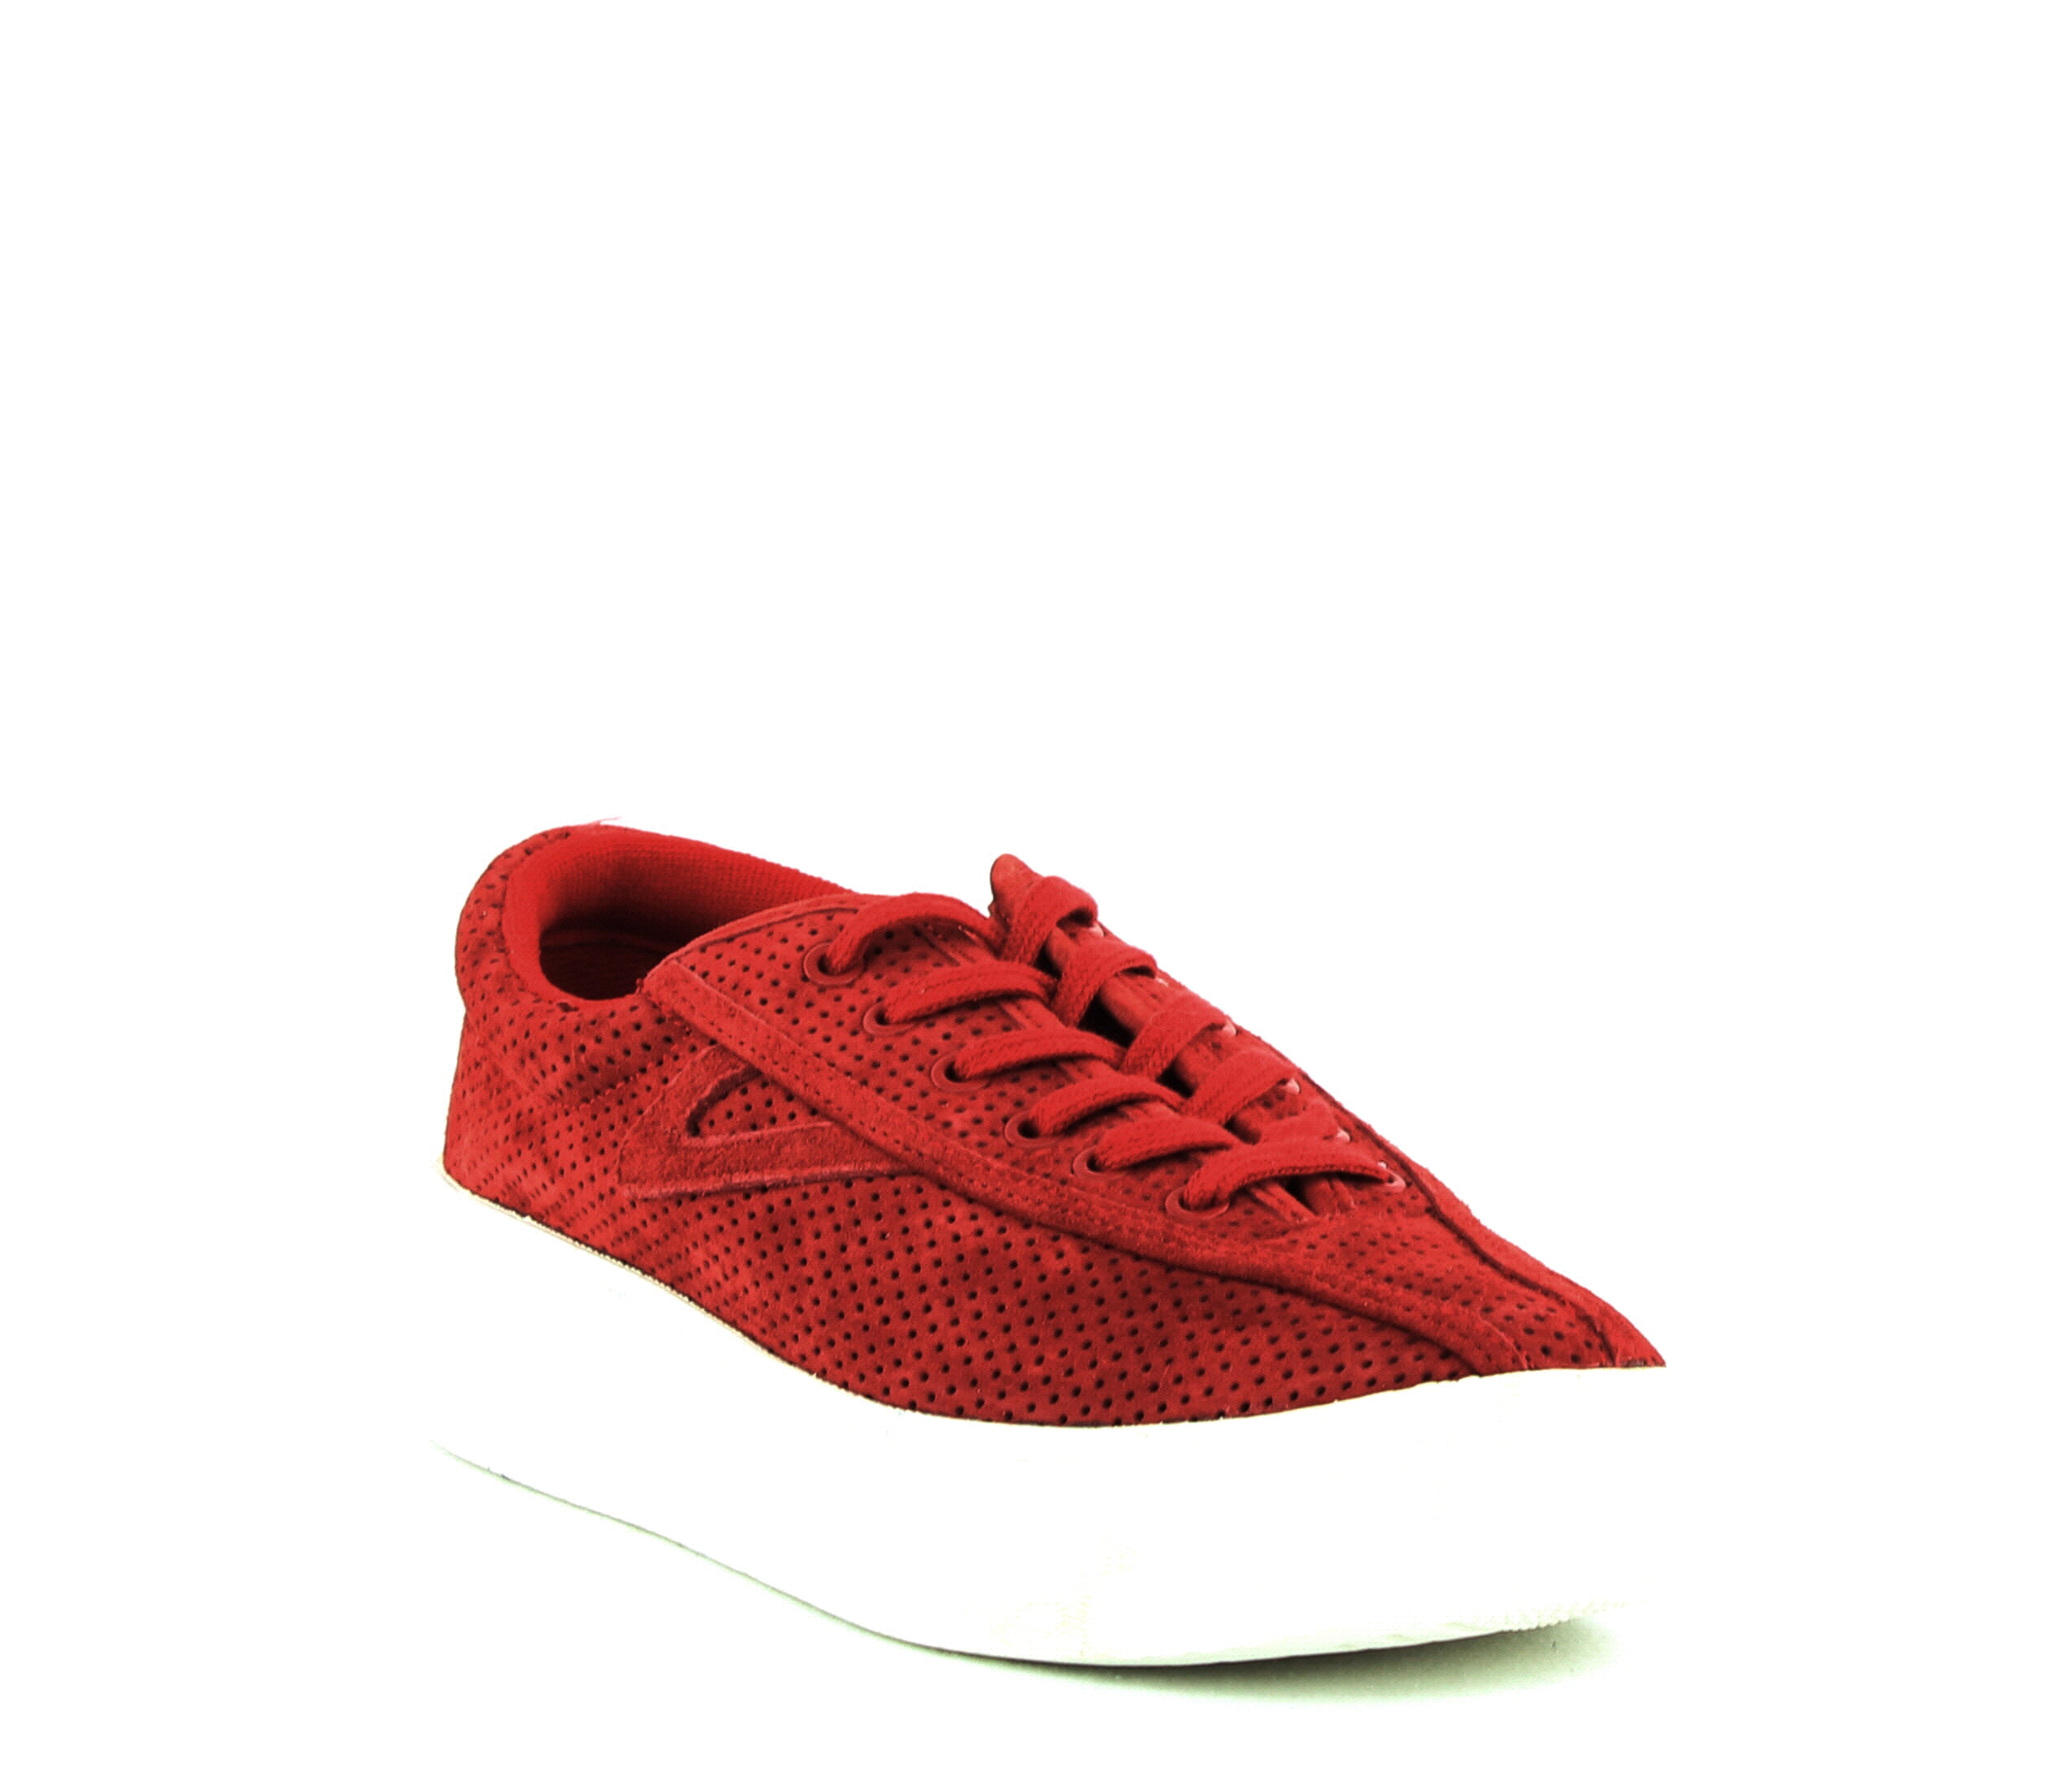 tretorn shoes red